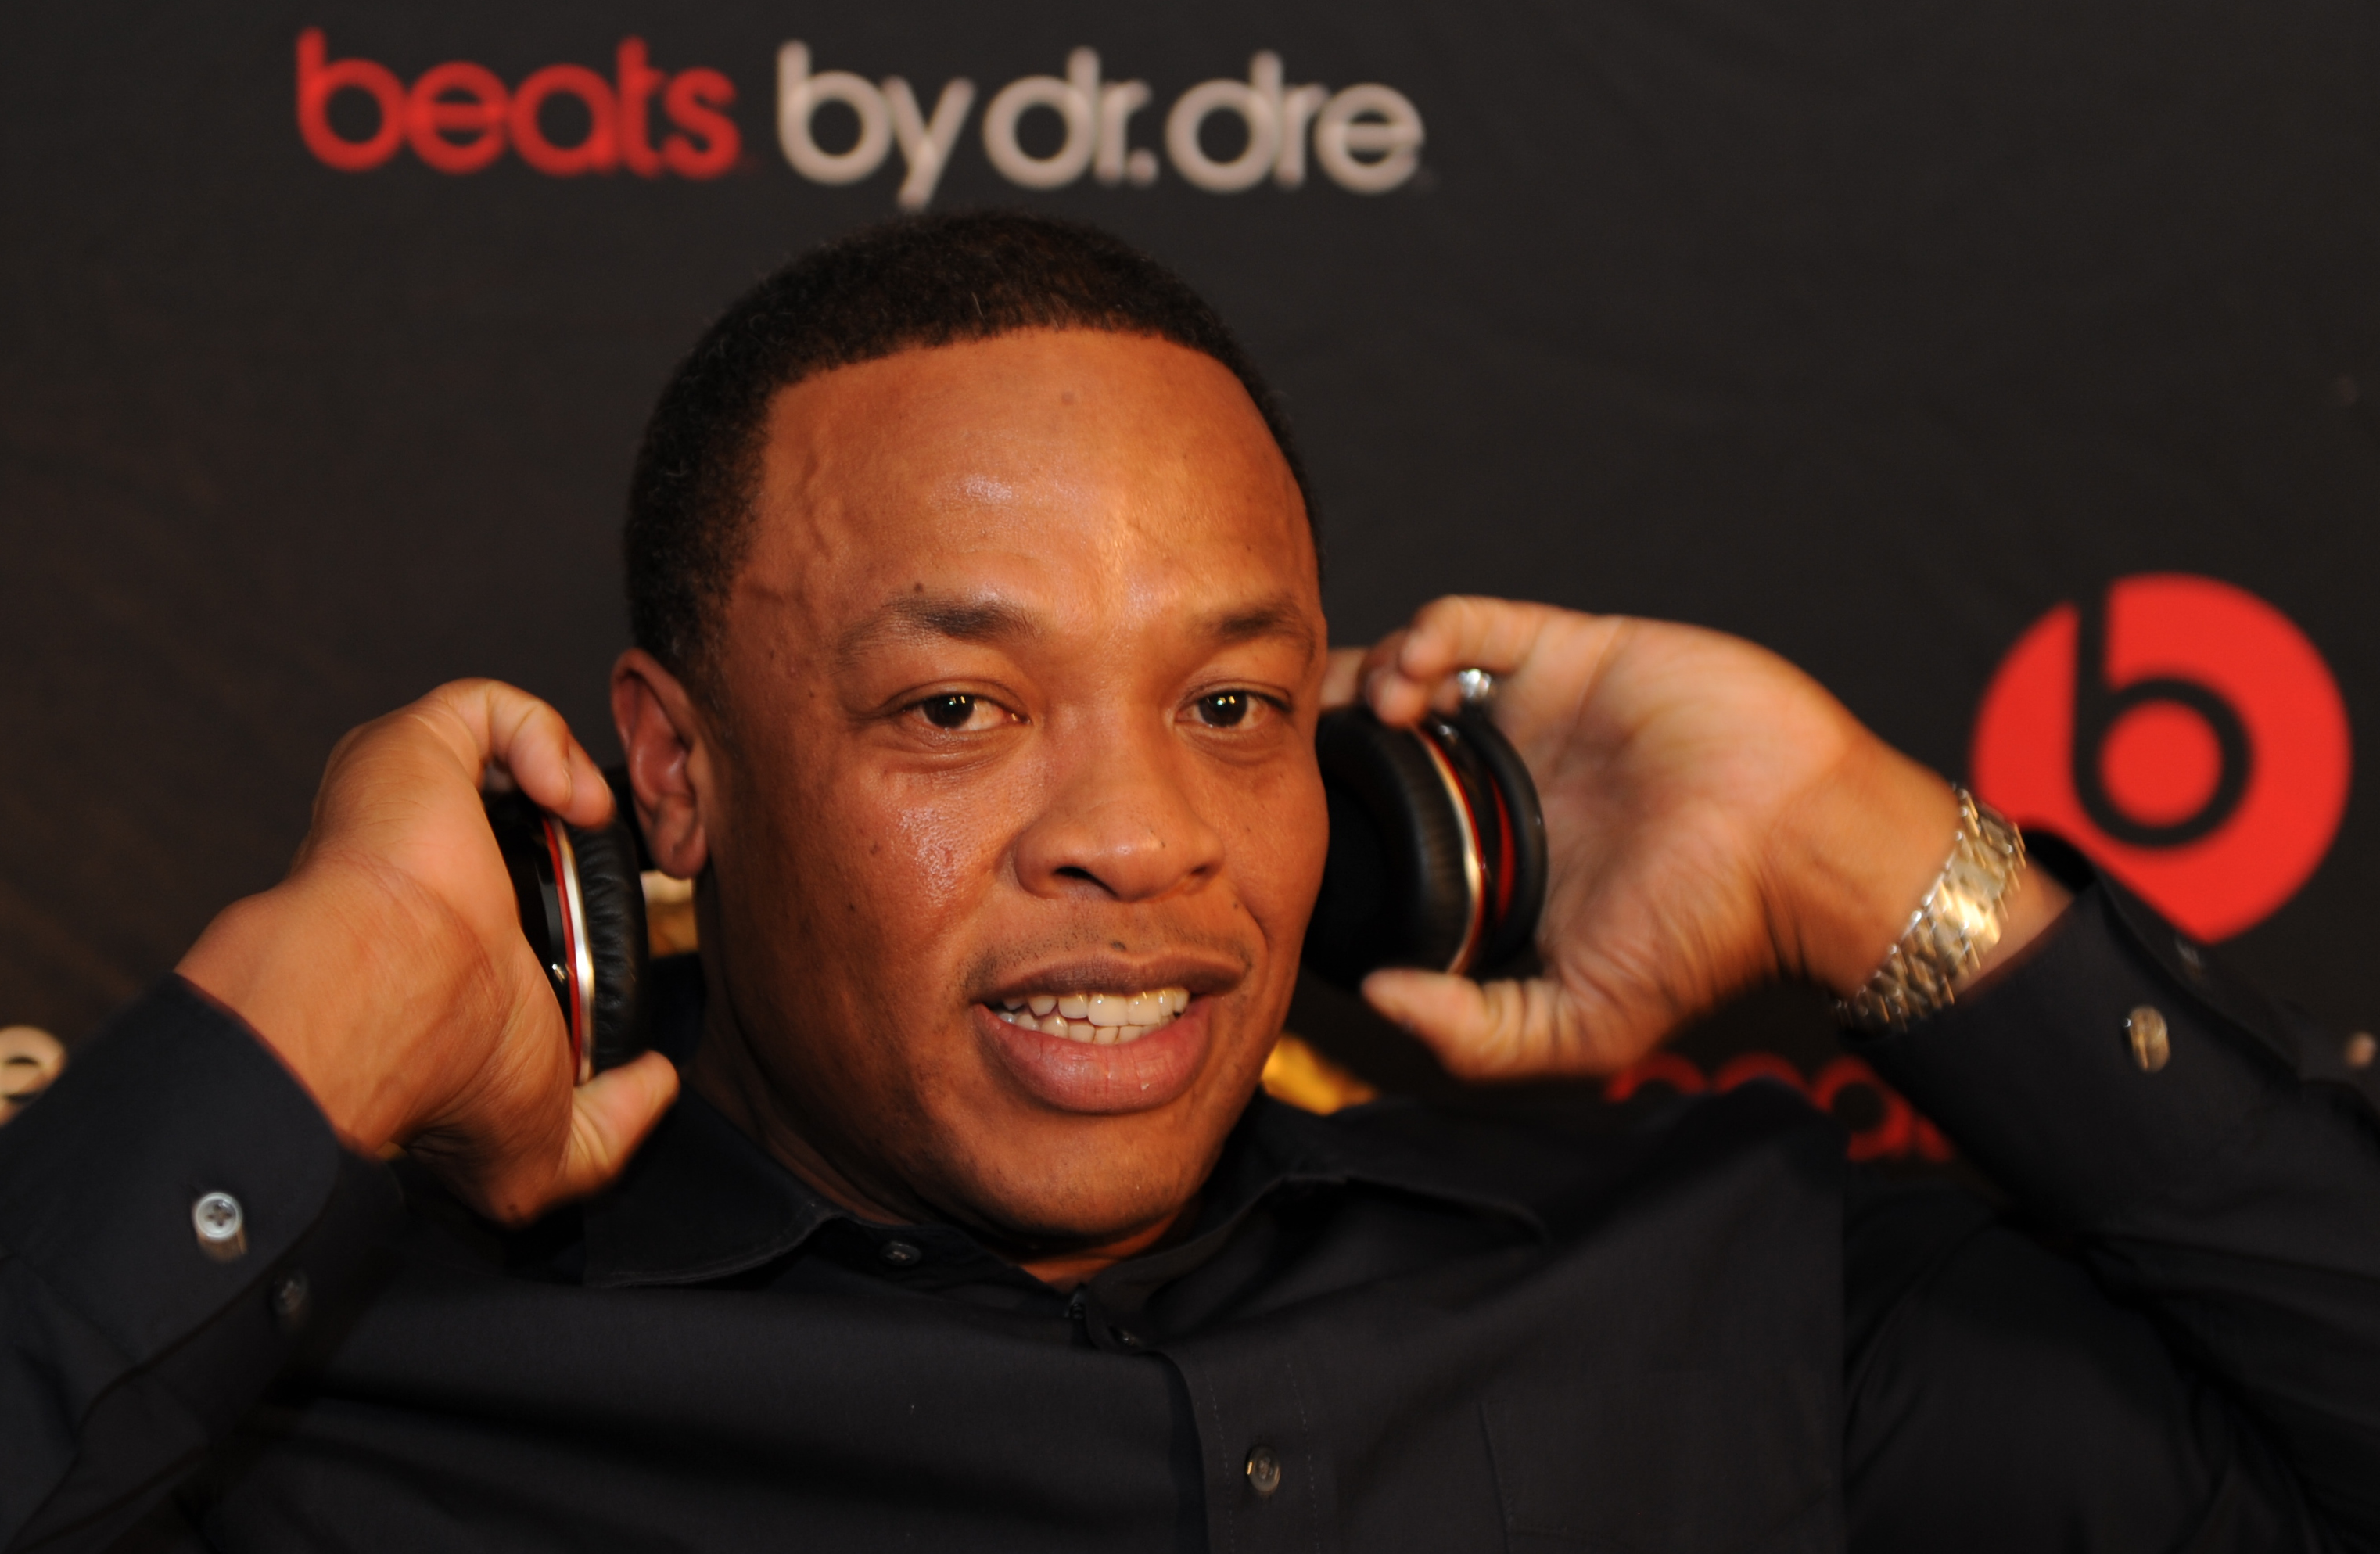 dre sold beats for